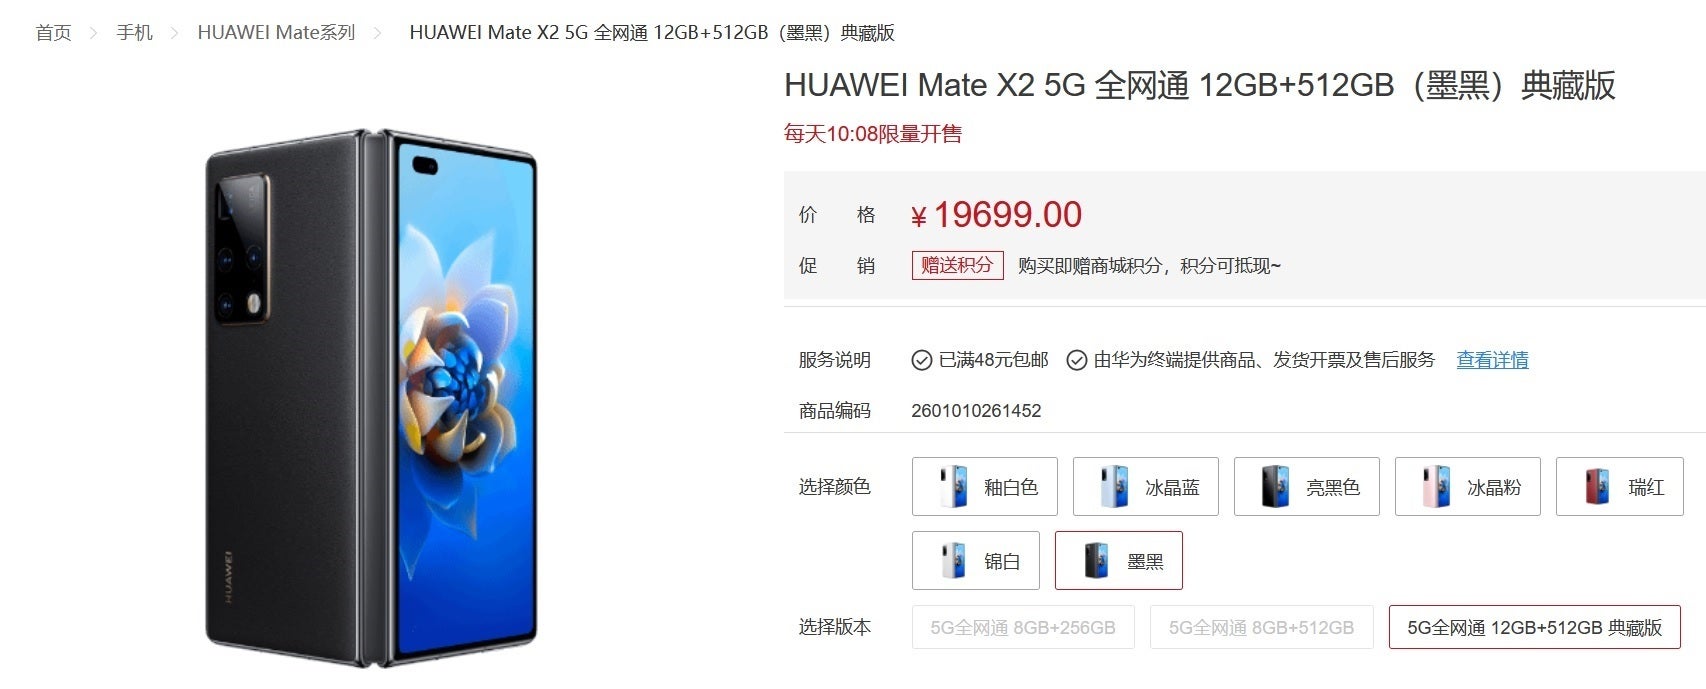 Huawei Mate X2 Collector&#039;s Edition is now on sale in China - Latest rumored specs for 5G Honor Magic V foldable; Huawei Mate X2 Collector&#039;s Edition goes on sale